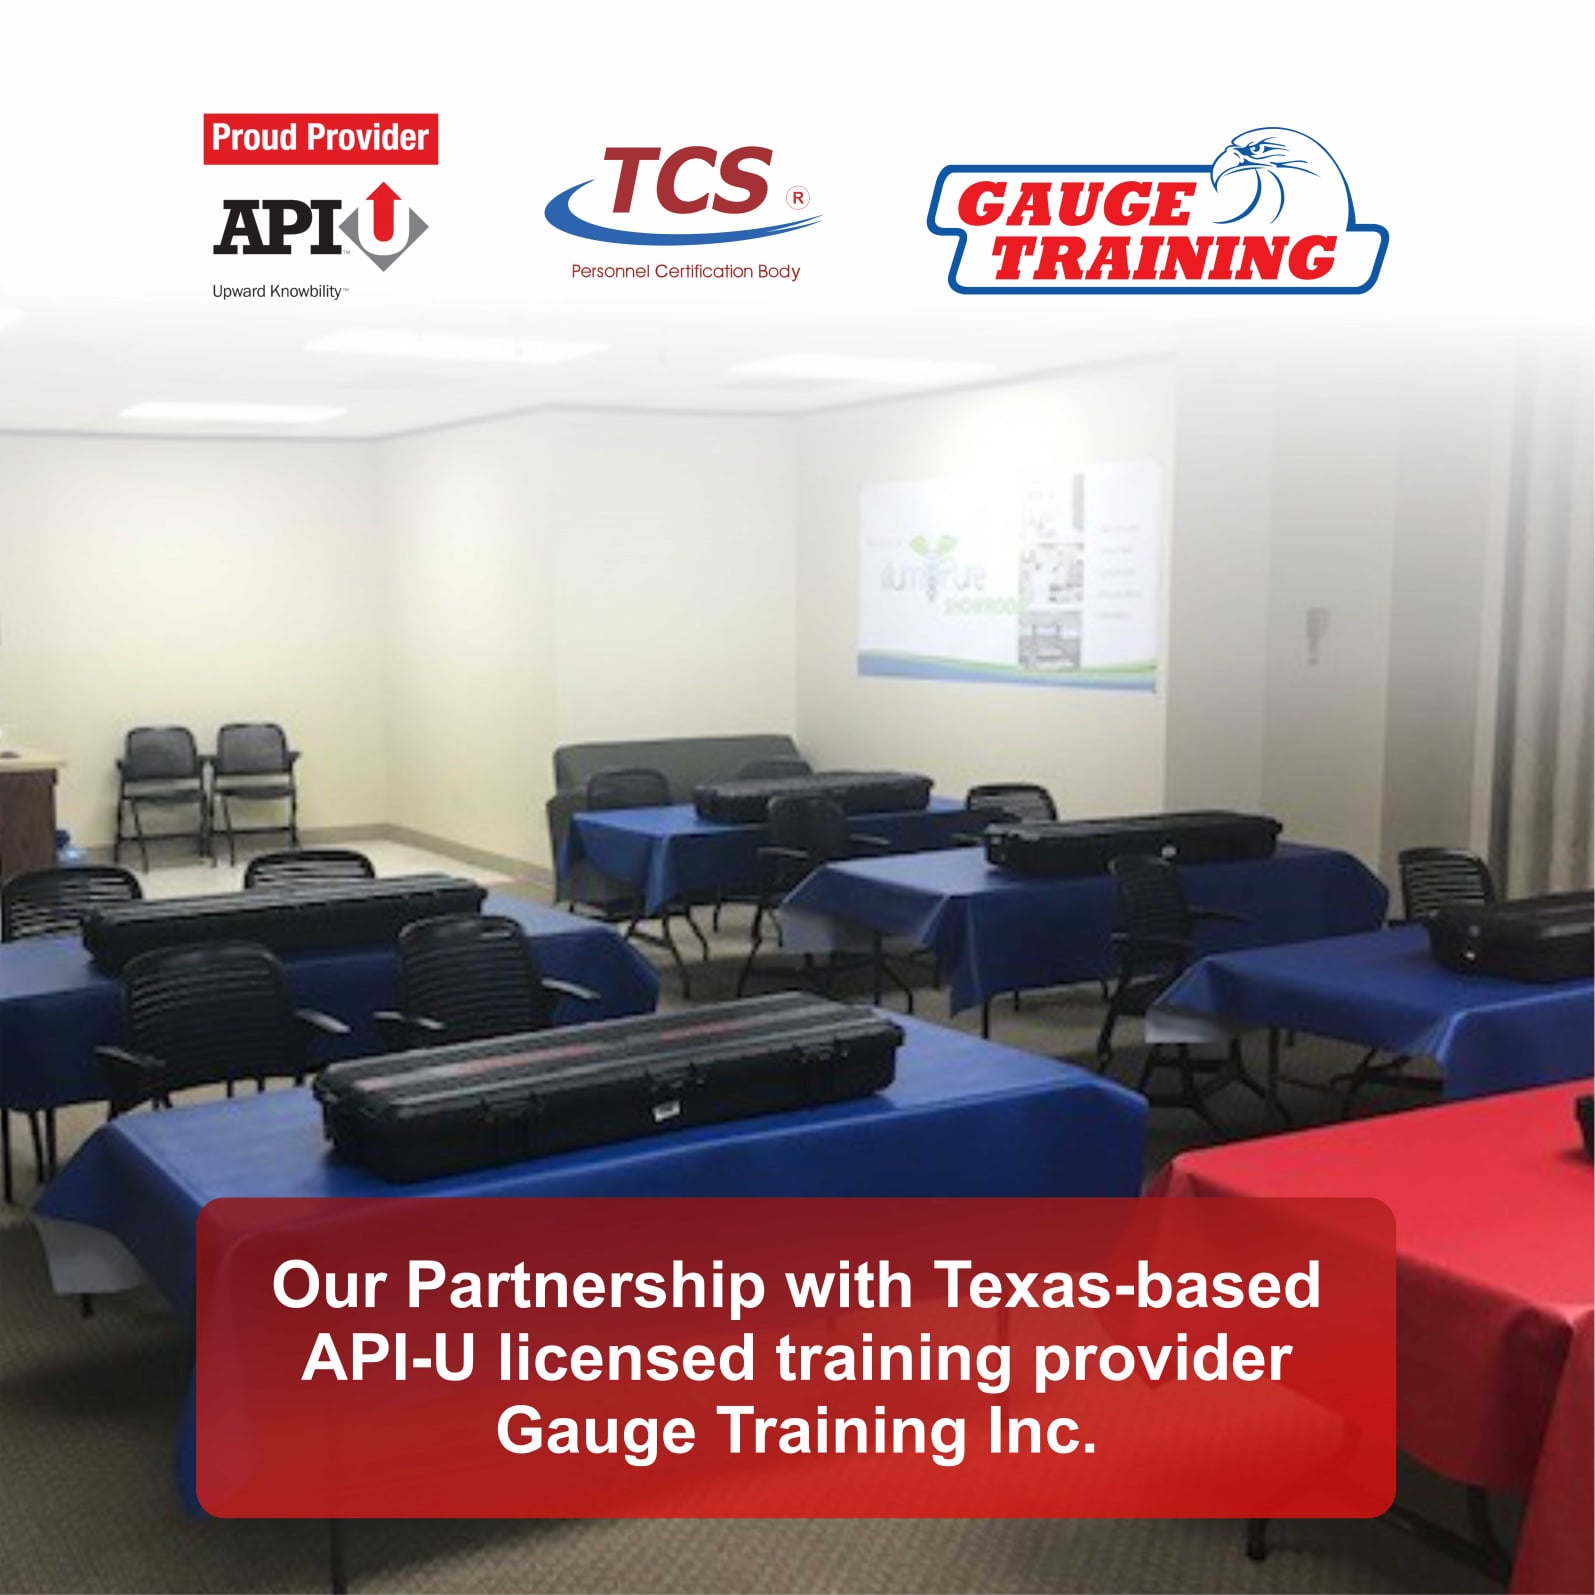 Our Partnership with "Gauge Training Inc."!